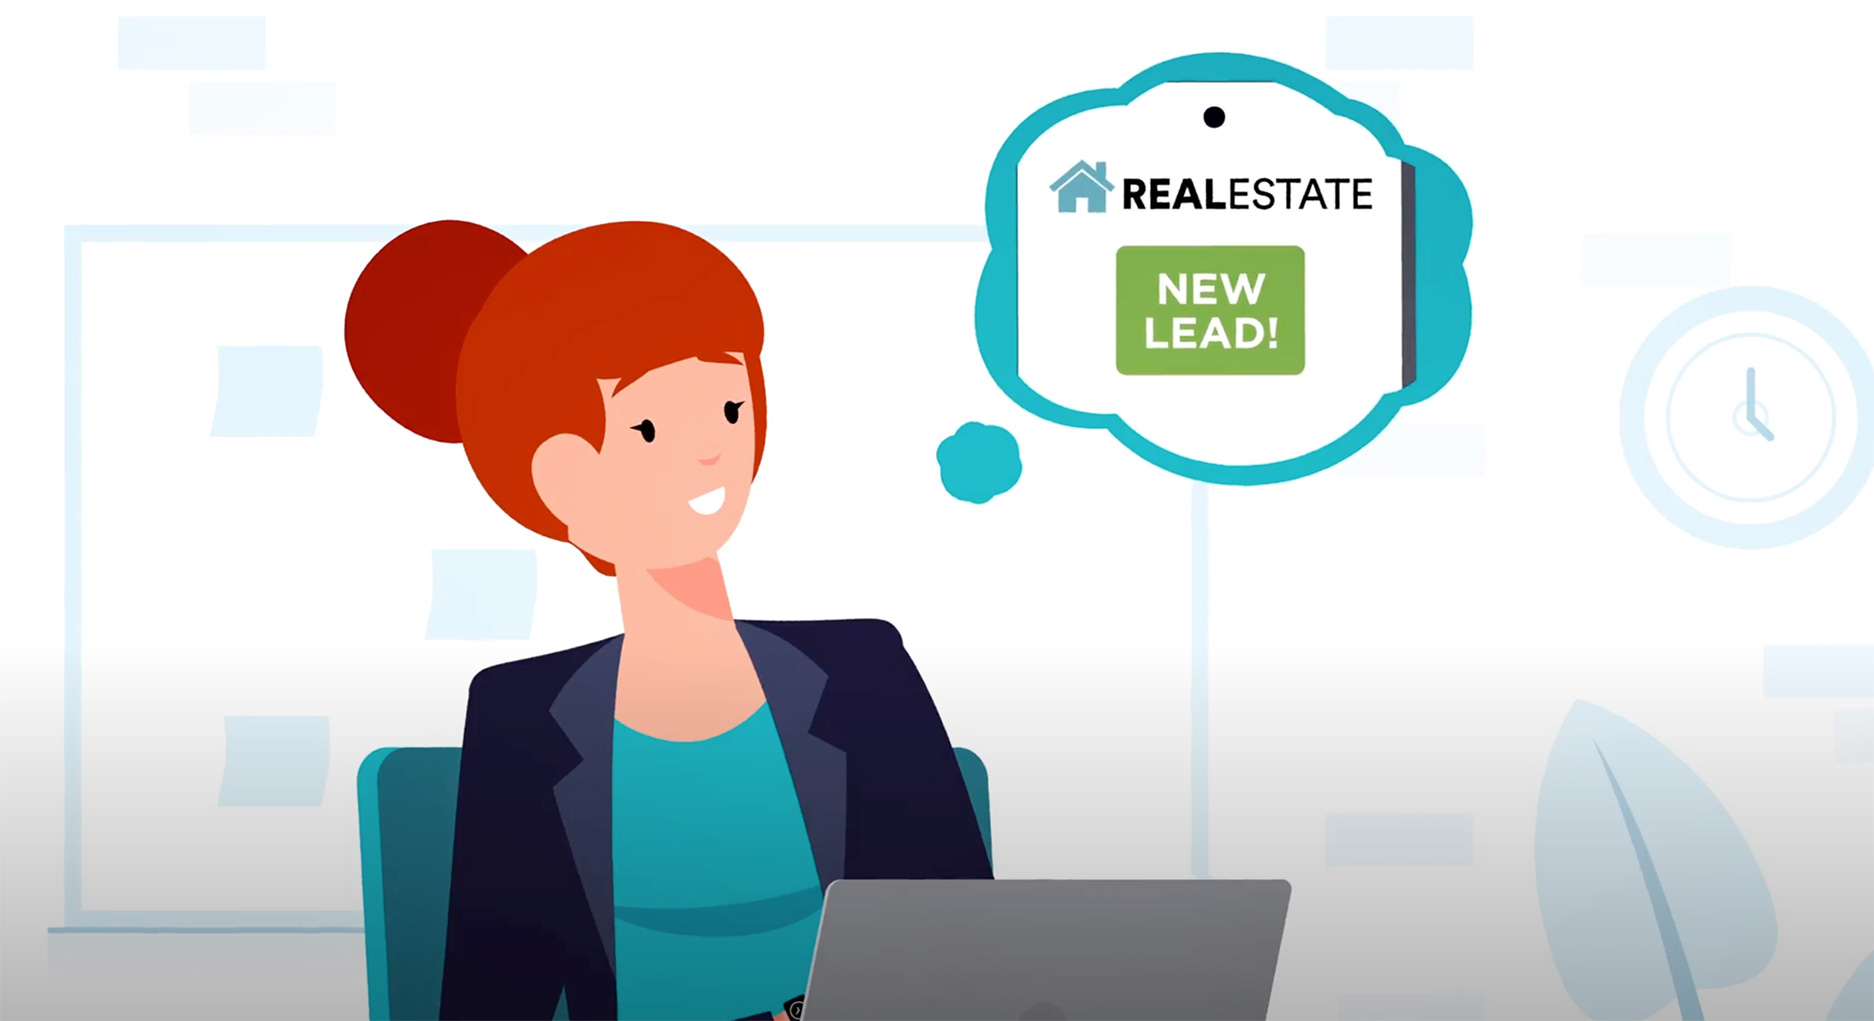 Increase your lead capture & conversion with CT Leads Pro & Real Estate 7!